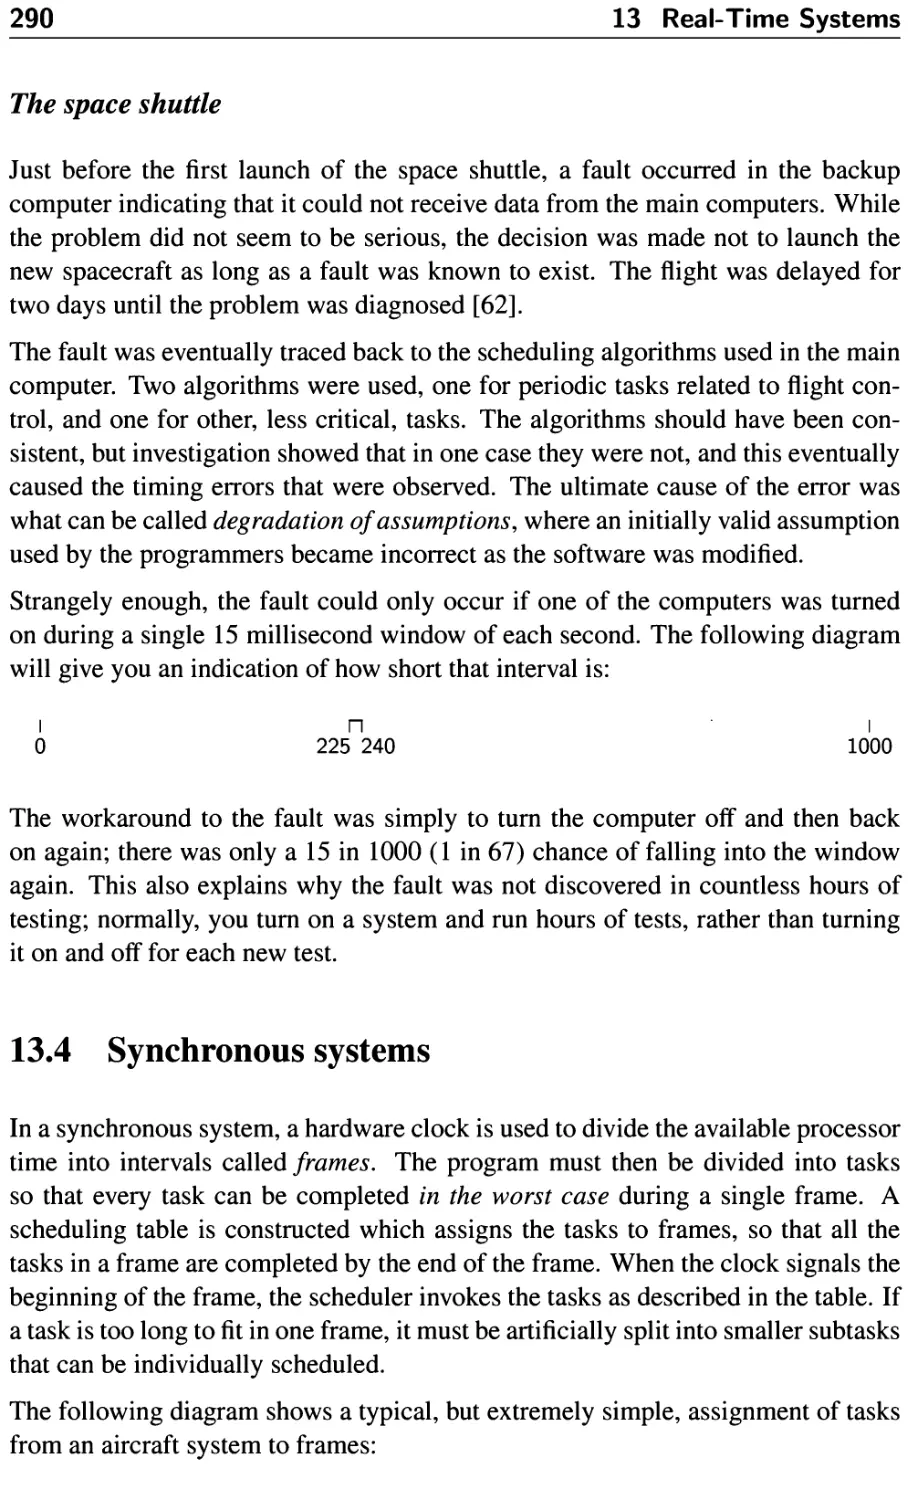 13.4 Synchronous systems